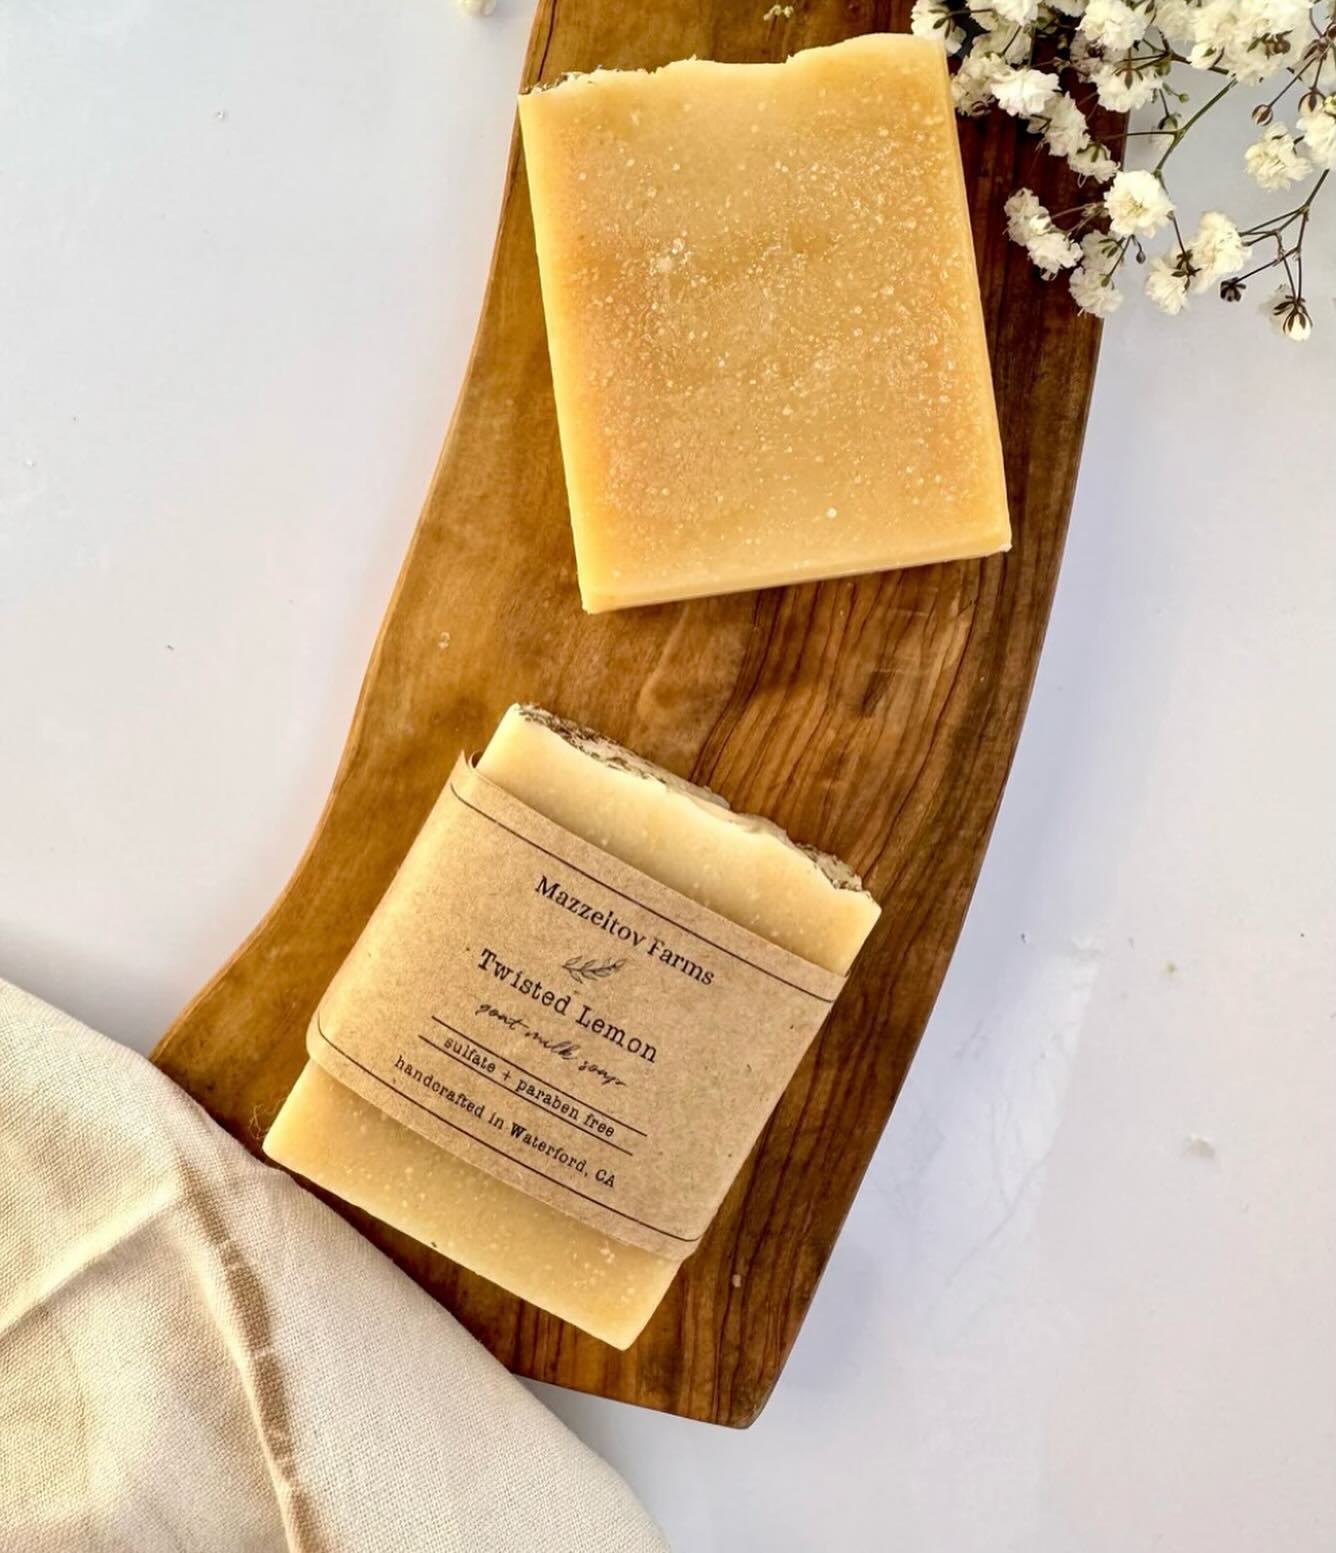 @mazzeltovfarmssoap is made from a tried and true recipe that includes six skin-loving oils and butters, that will leave your skin silky, smooth, and hydrated! Mazzeltov Farms Soap is made in small batches using fresh goats milk and you can certainly